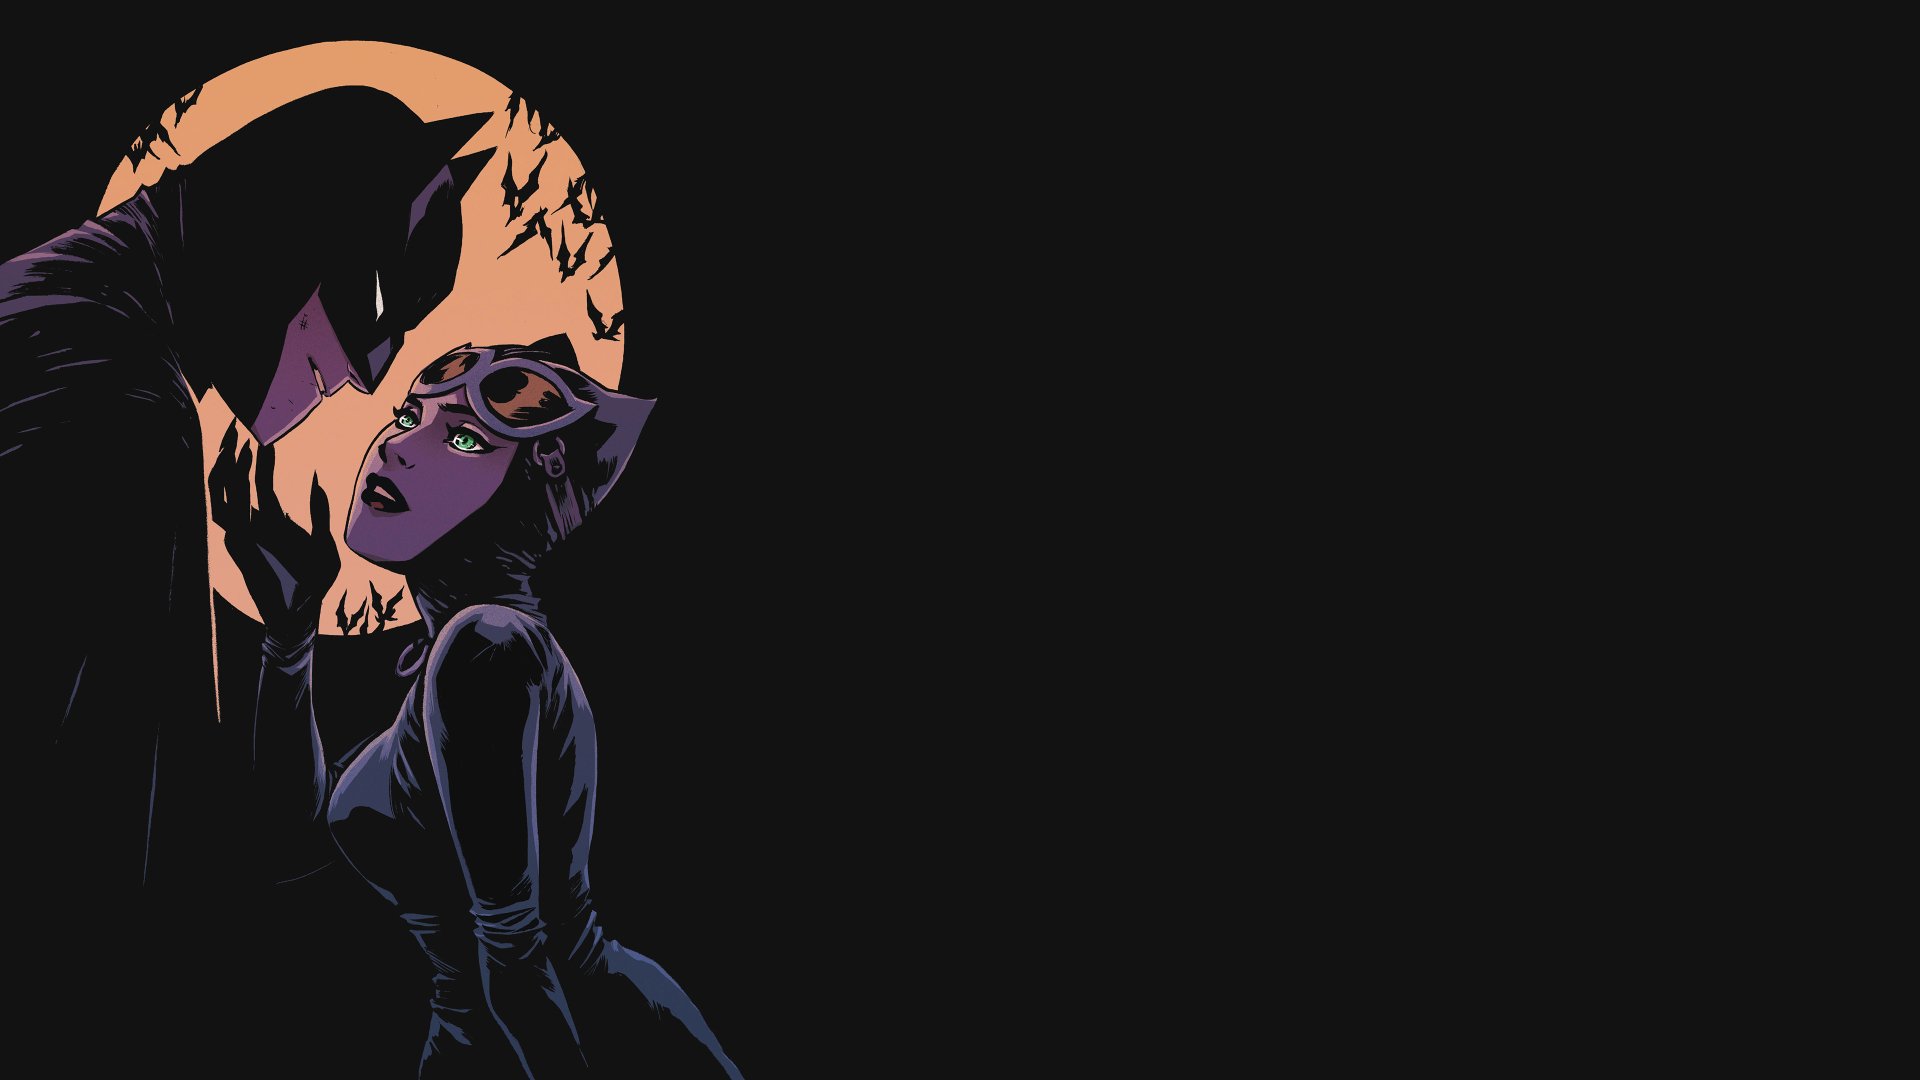 3840x2160 Batman and Catwoman Wallpaper Background Image. 